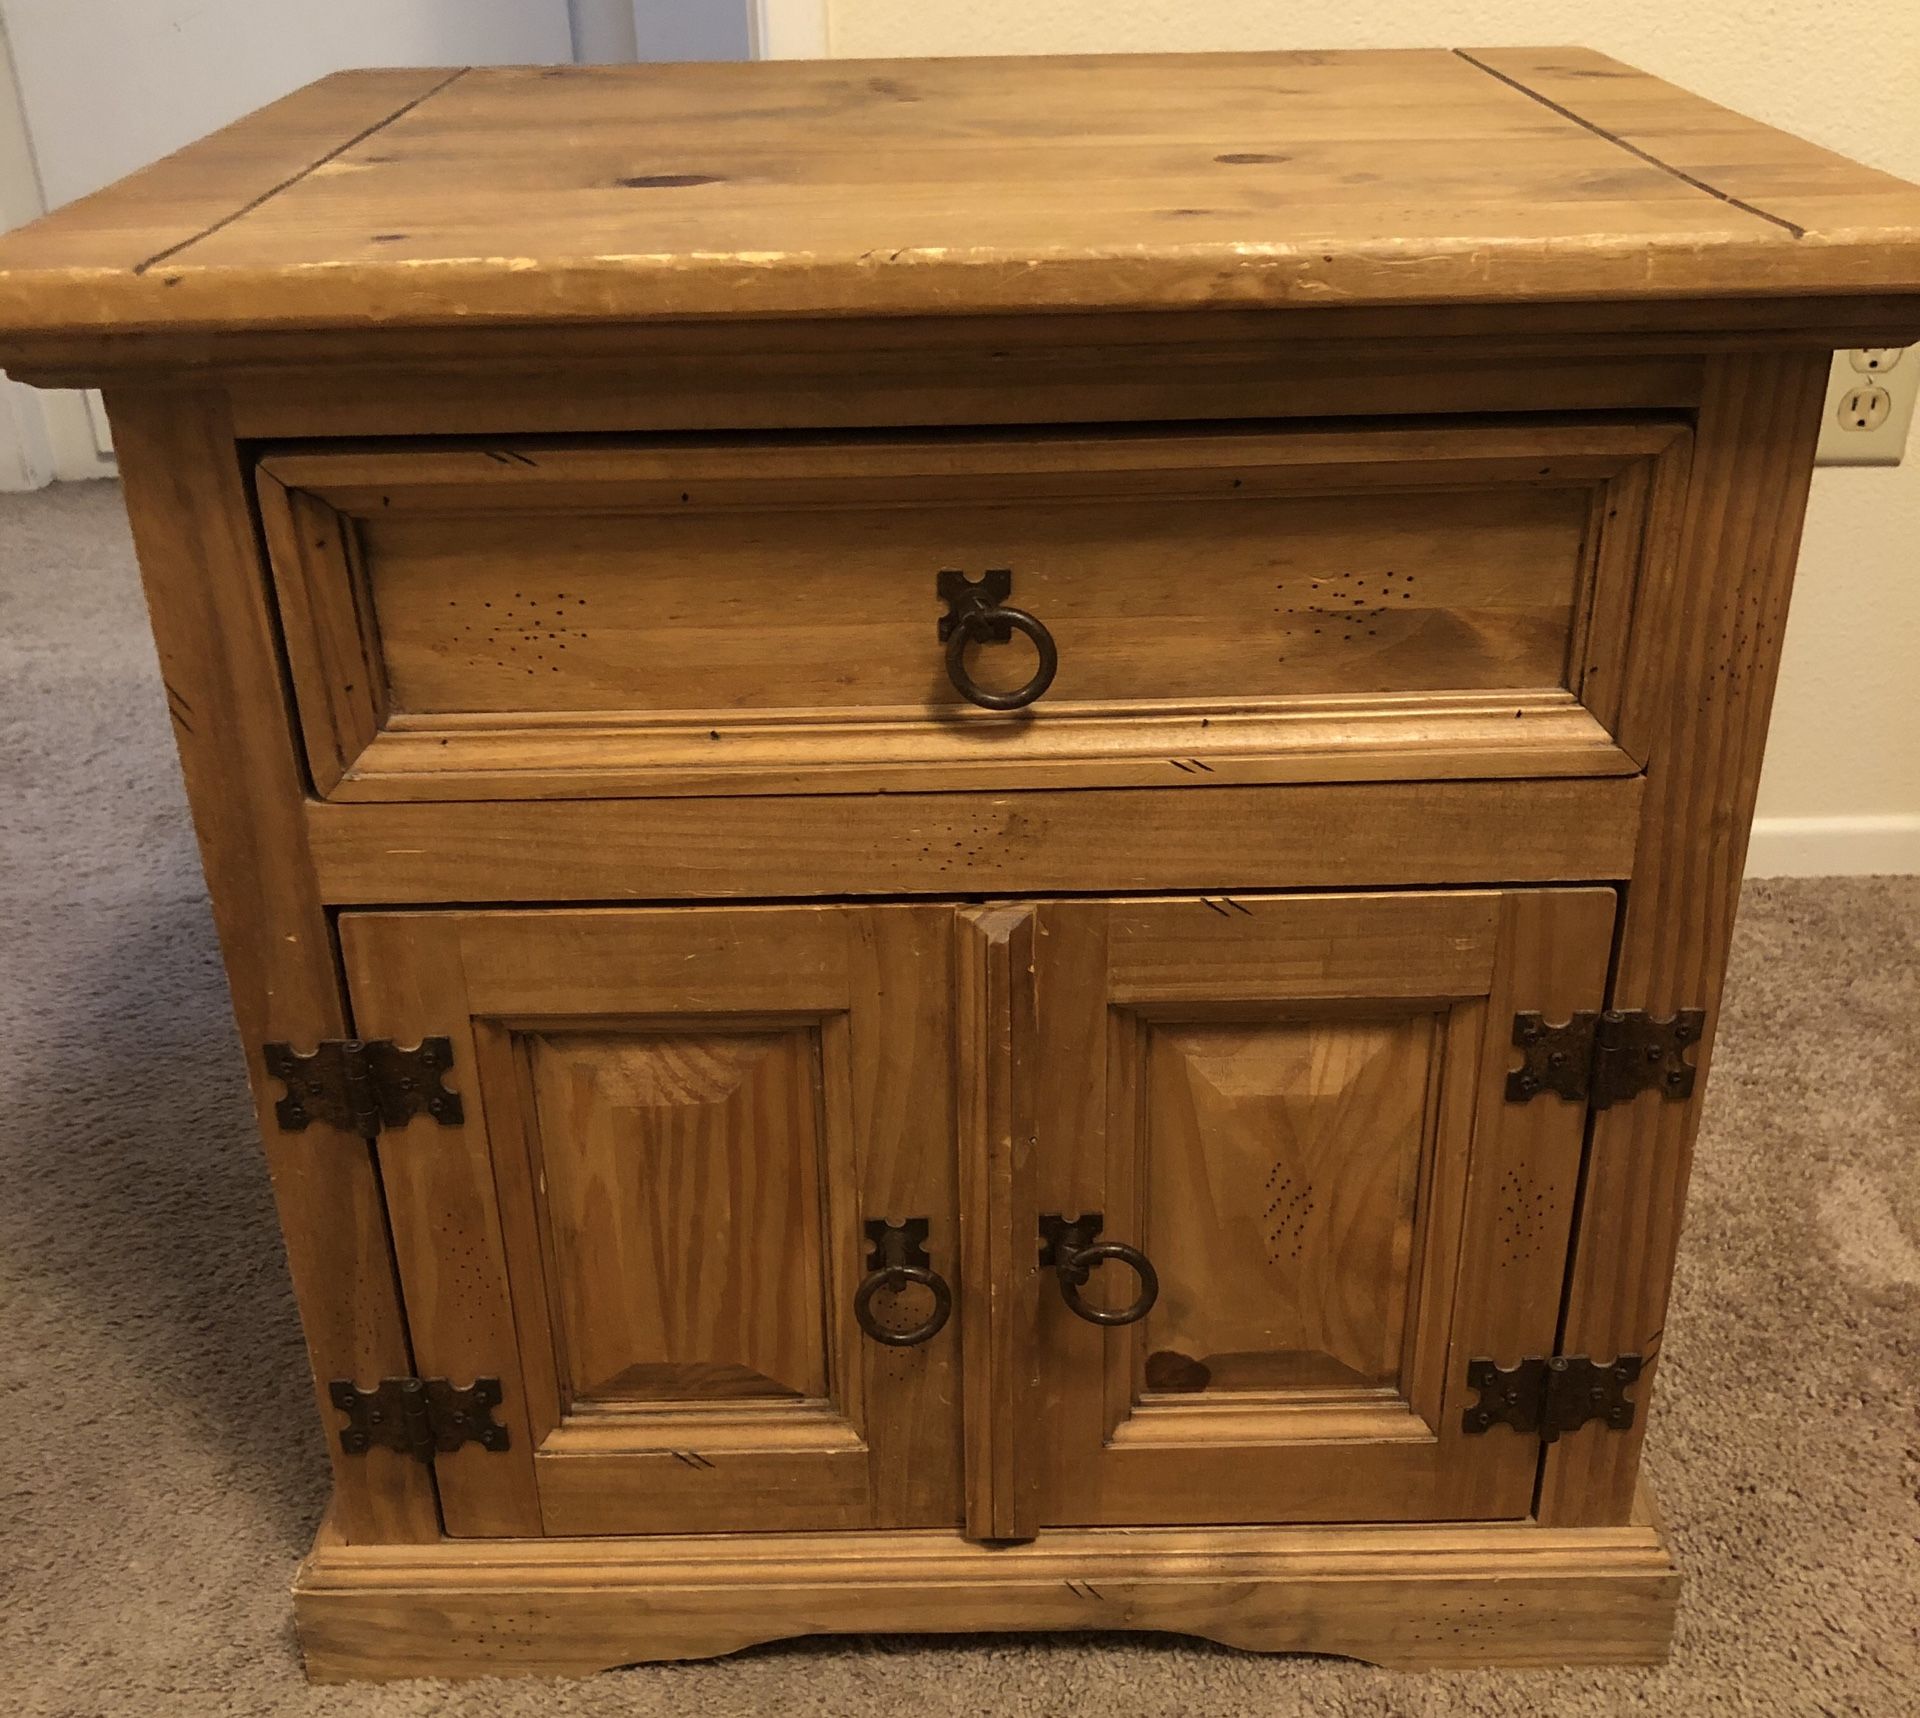 Cabinet/End Table/Nightstand with drawer and small cabinet